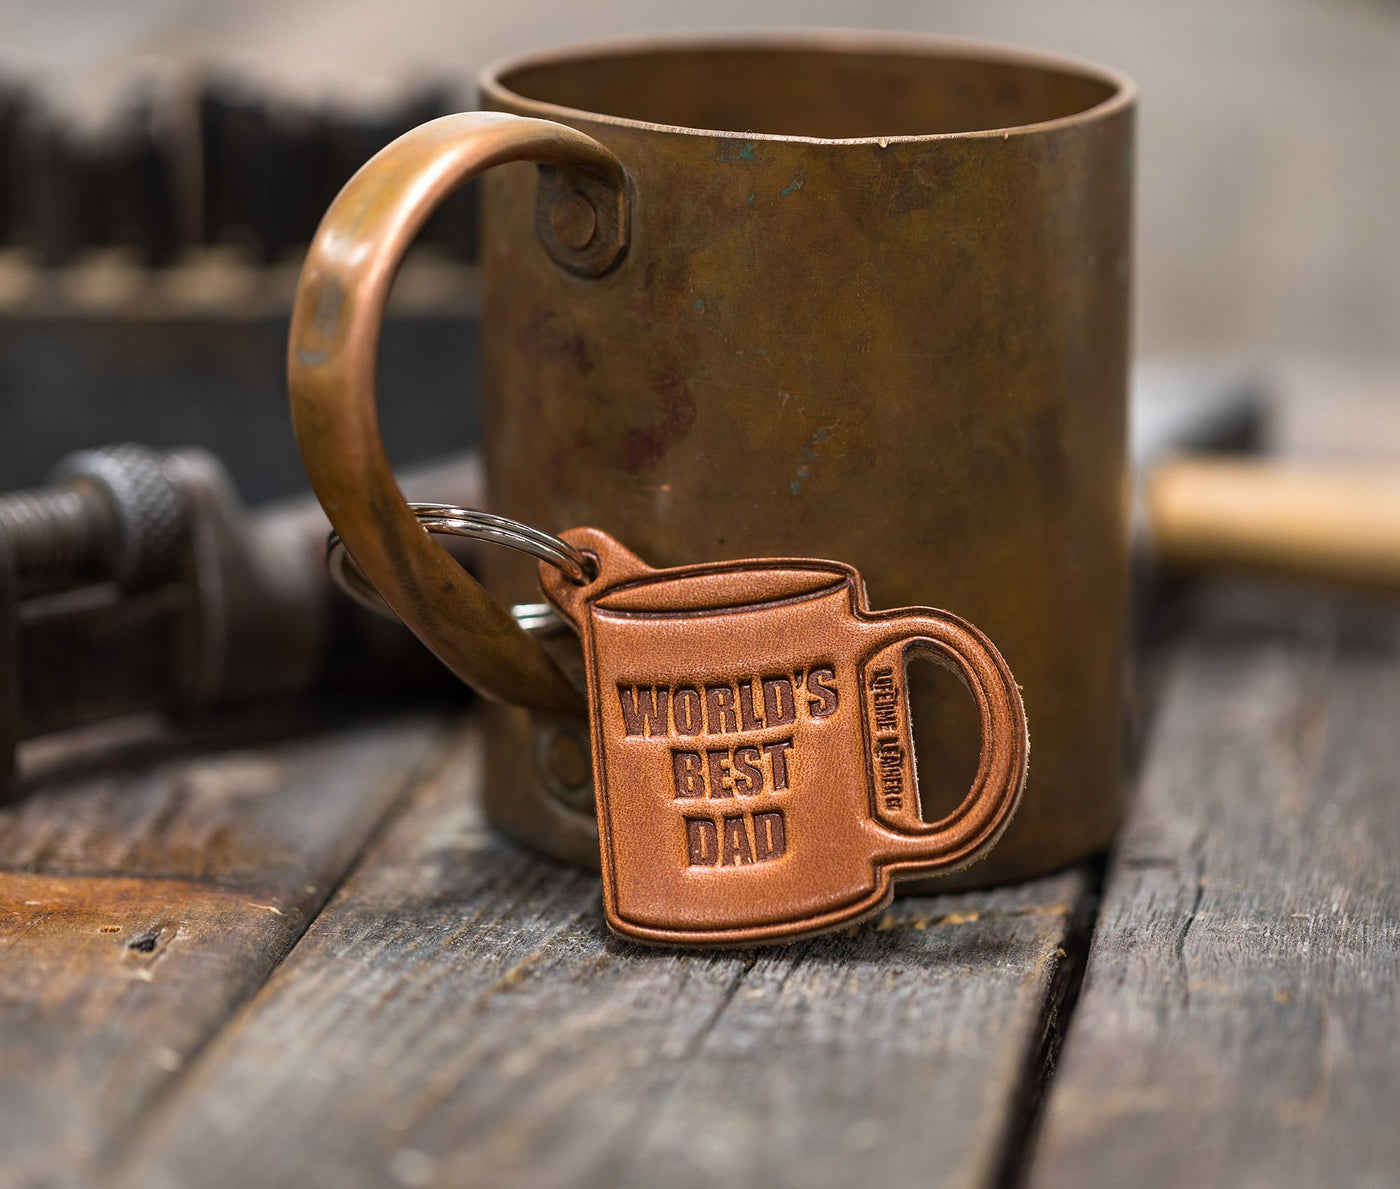 World's Best Dad Leather Keychain by Lifetime Leather Co